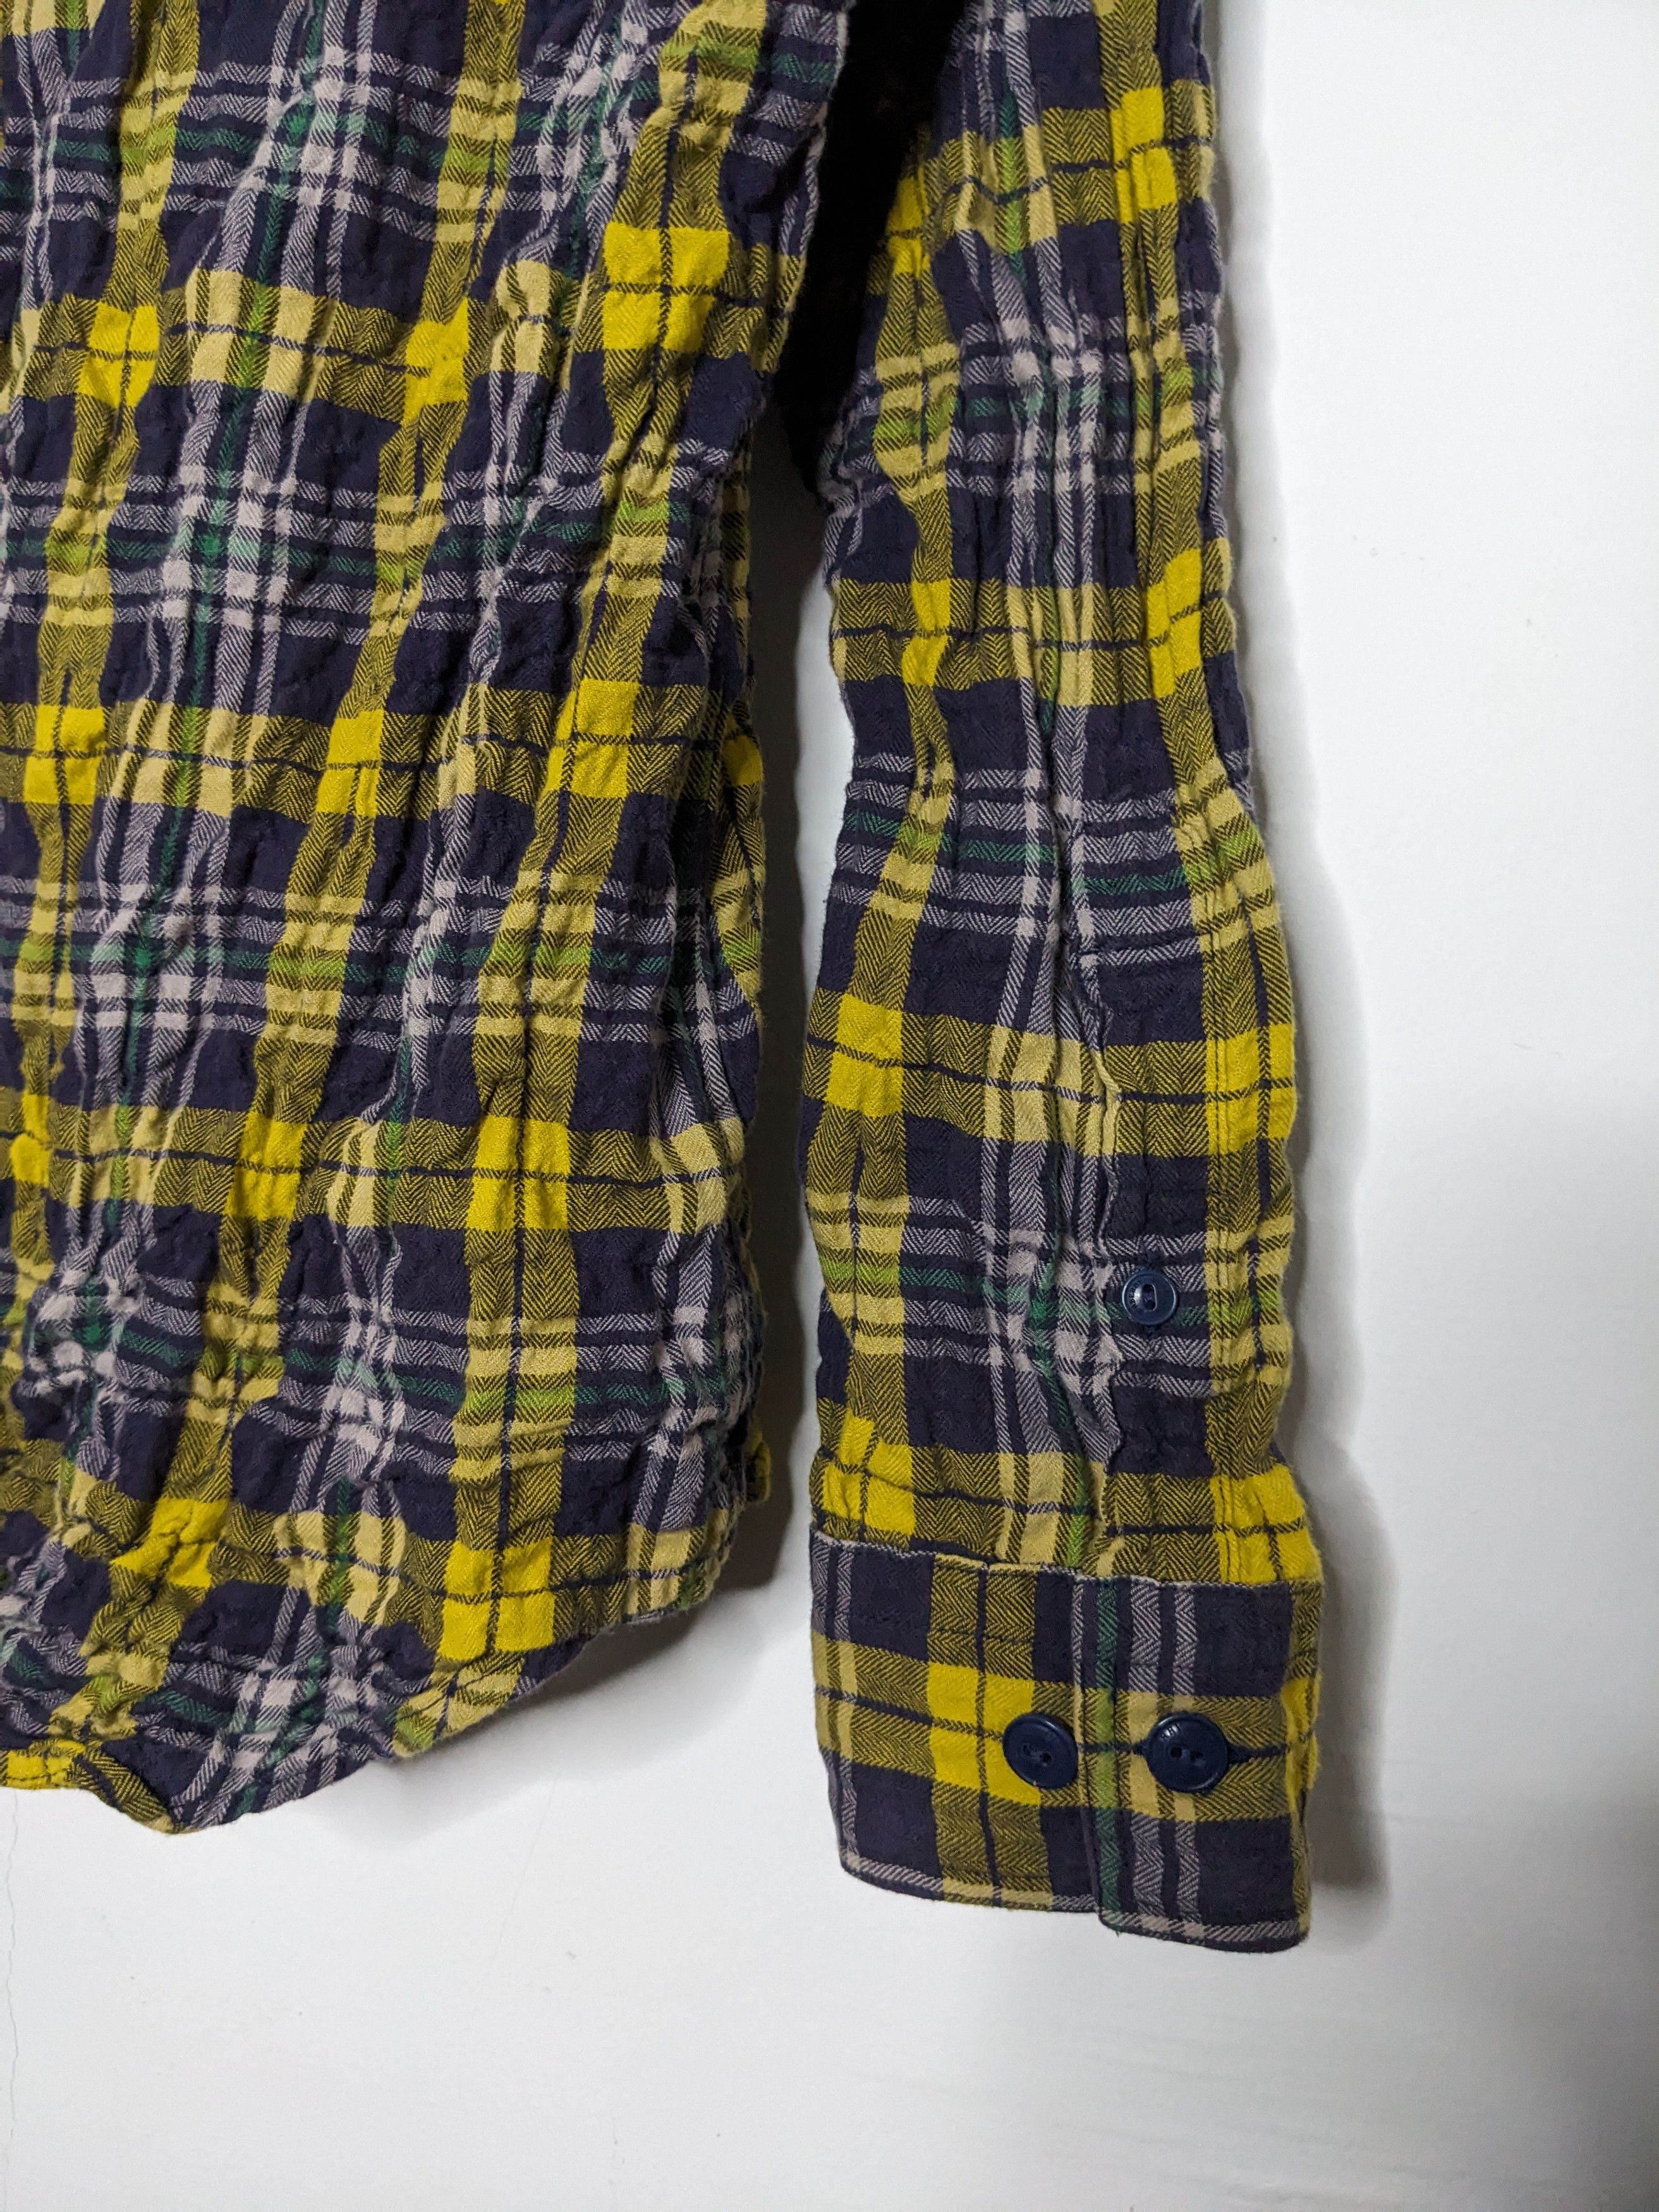 Burberry London Wrinkle Style Checked Plaid Flannel Shirt - 6